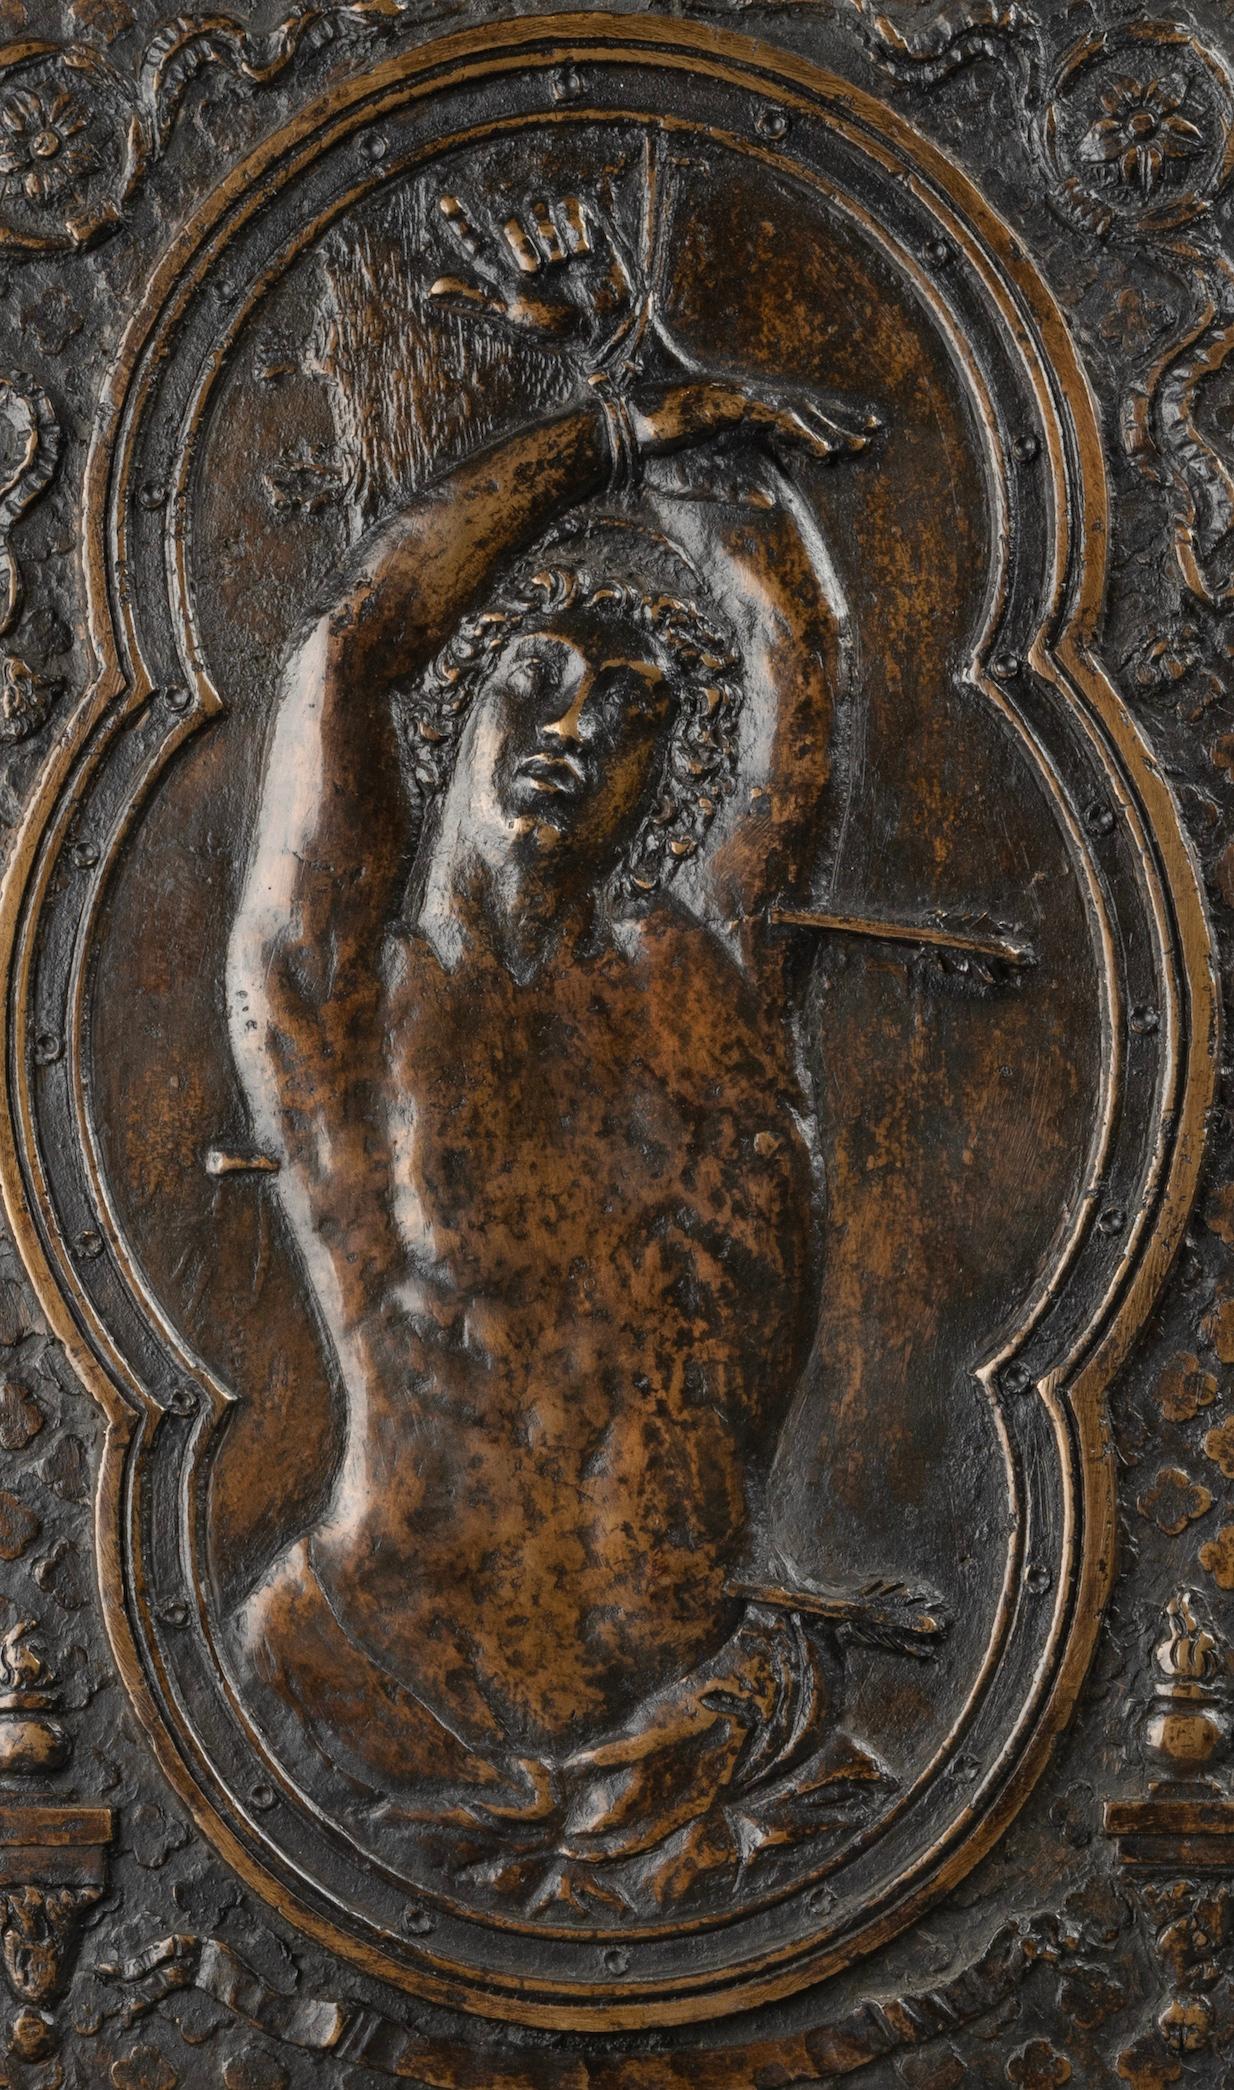 Large Cast and Chiseled Bronze Plaque
Saint Sebastian after the model by Guido Reni (Capitoline Museum)
Rome, 17th century

Large rectangular bronze plaque depicting the martyrdom of Saint Sebastian within a quadrilobe frame. The background of the